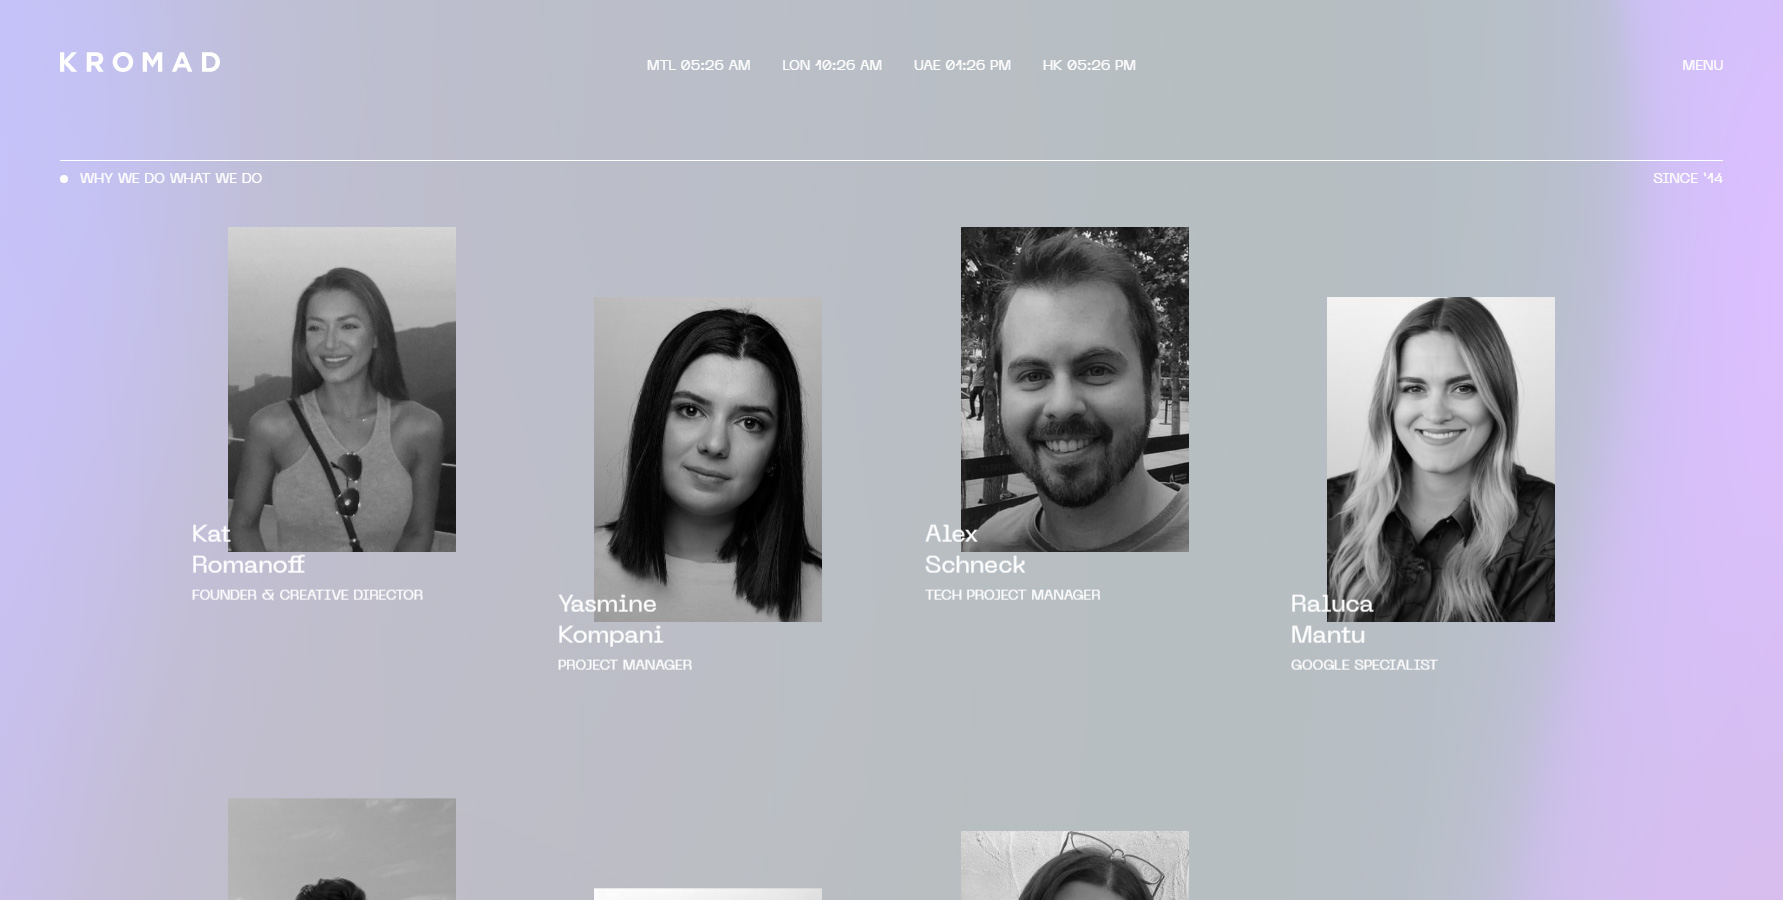 KROMAD - Website of the Day